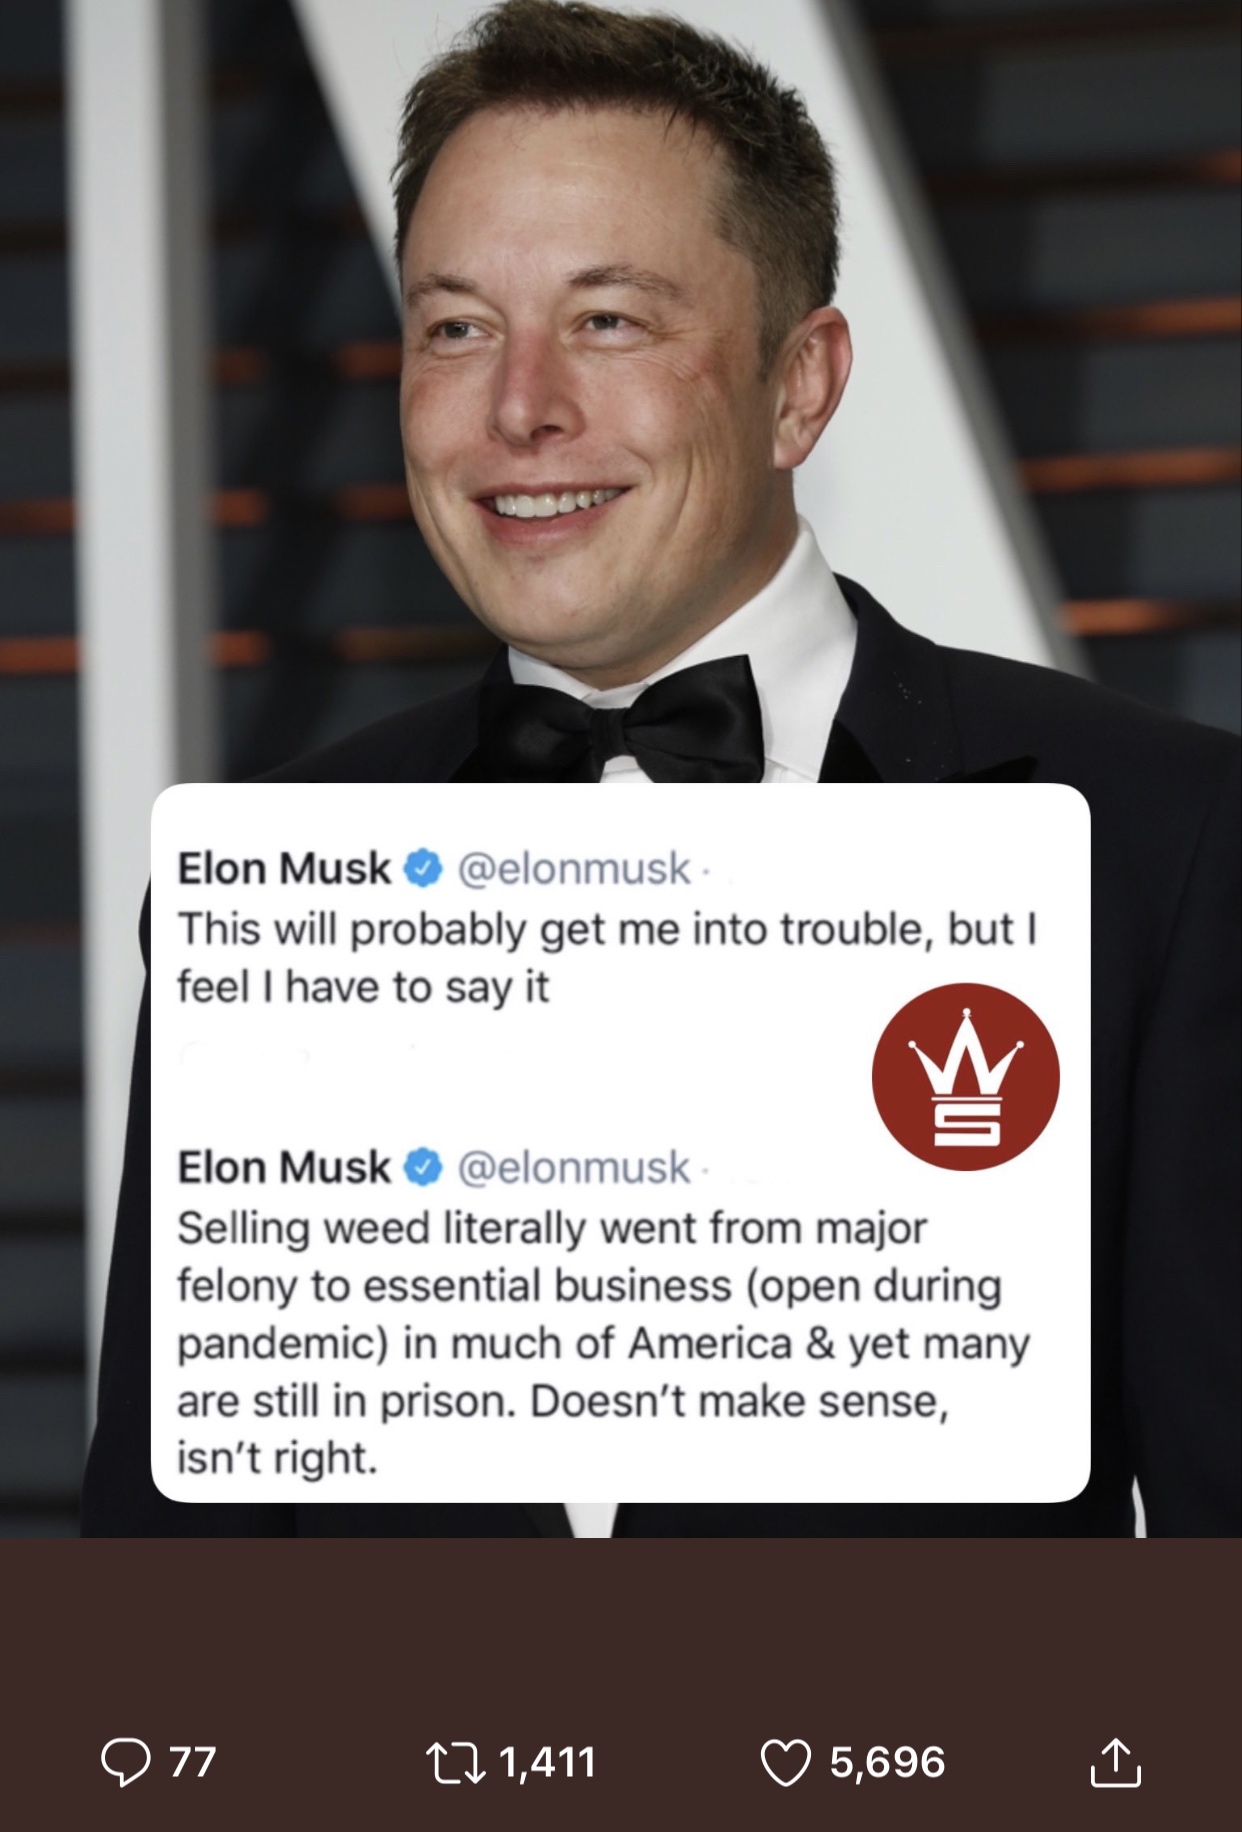 Elon Musk This will probably get me into trouble, but I feel I have to say it Su Elon Musk Selling weed literally went from major felony to essential business open during pandemic in much of America & yet many are still in prison. Doesn't make sense, isn'